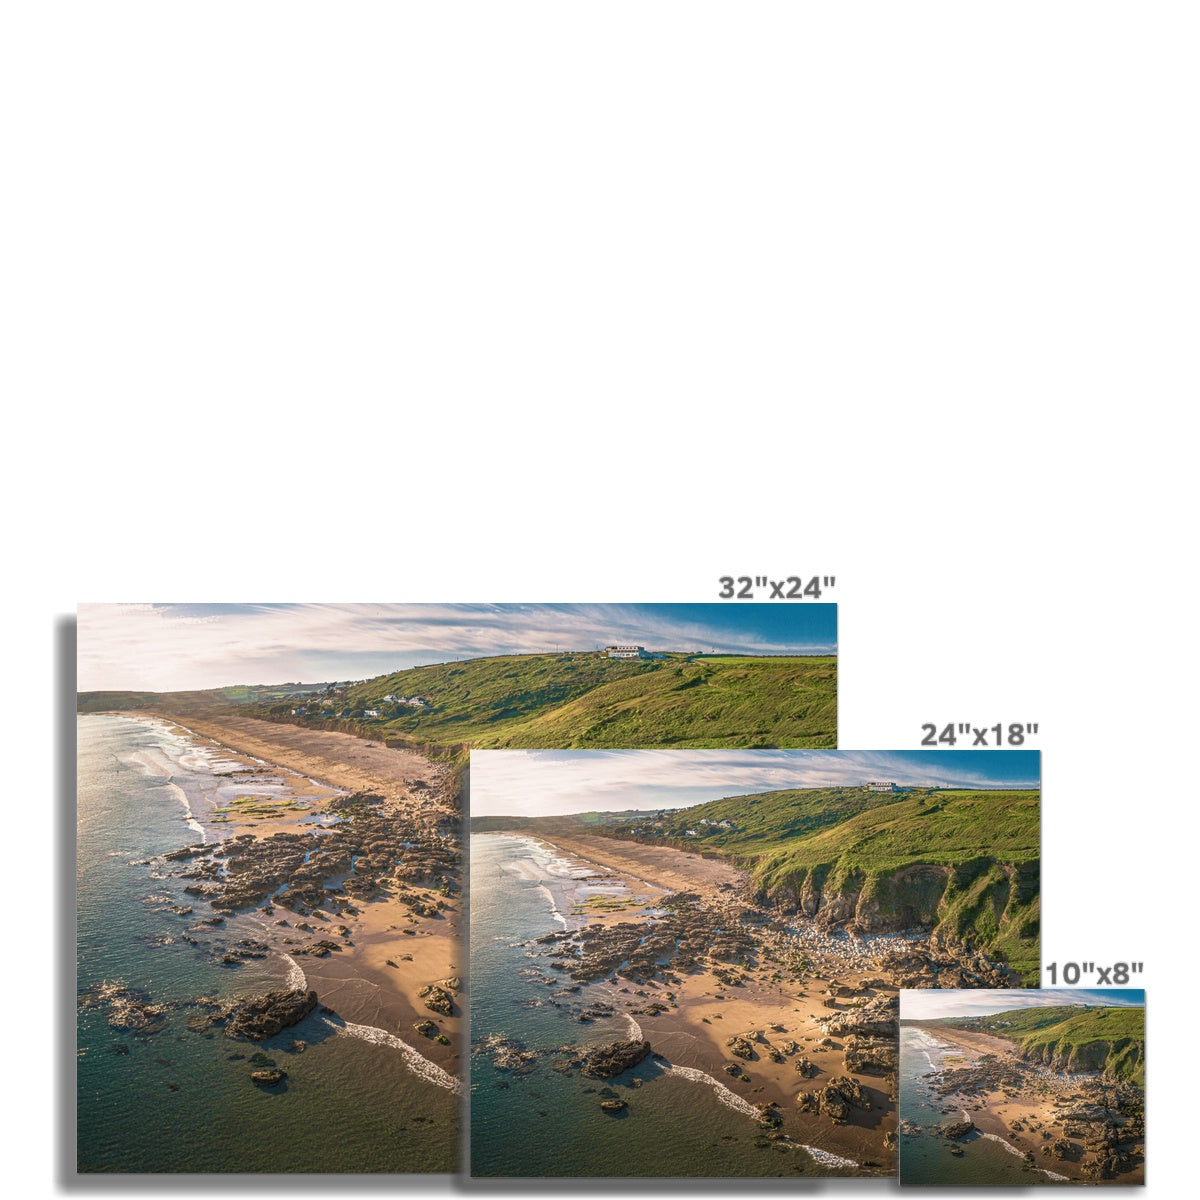 praa sands picture sizes